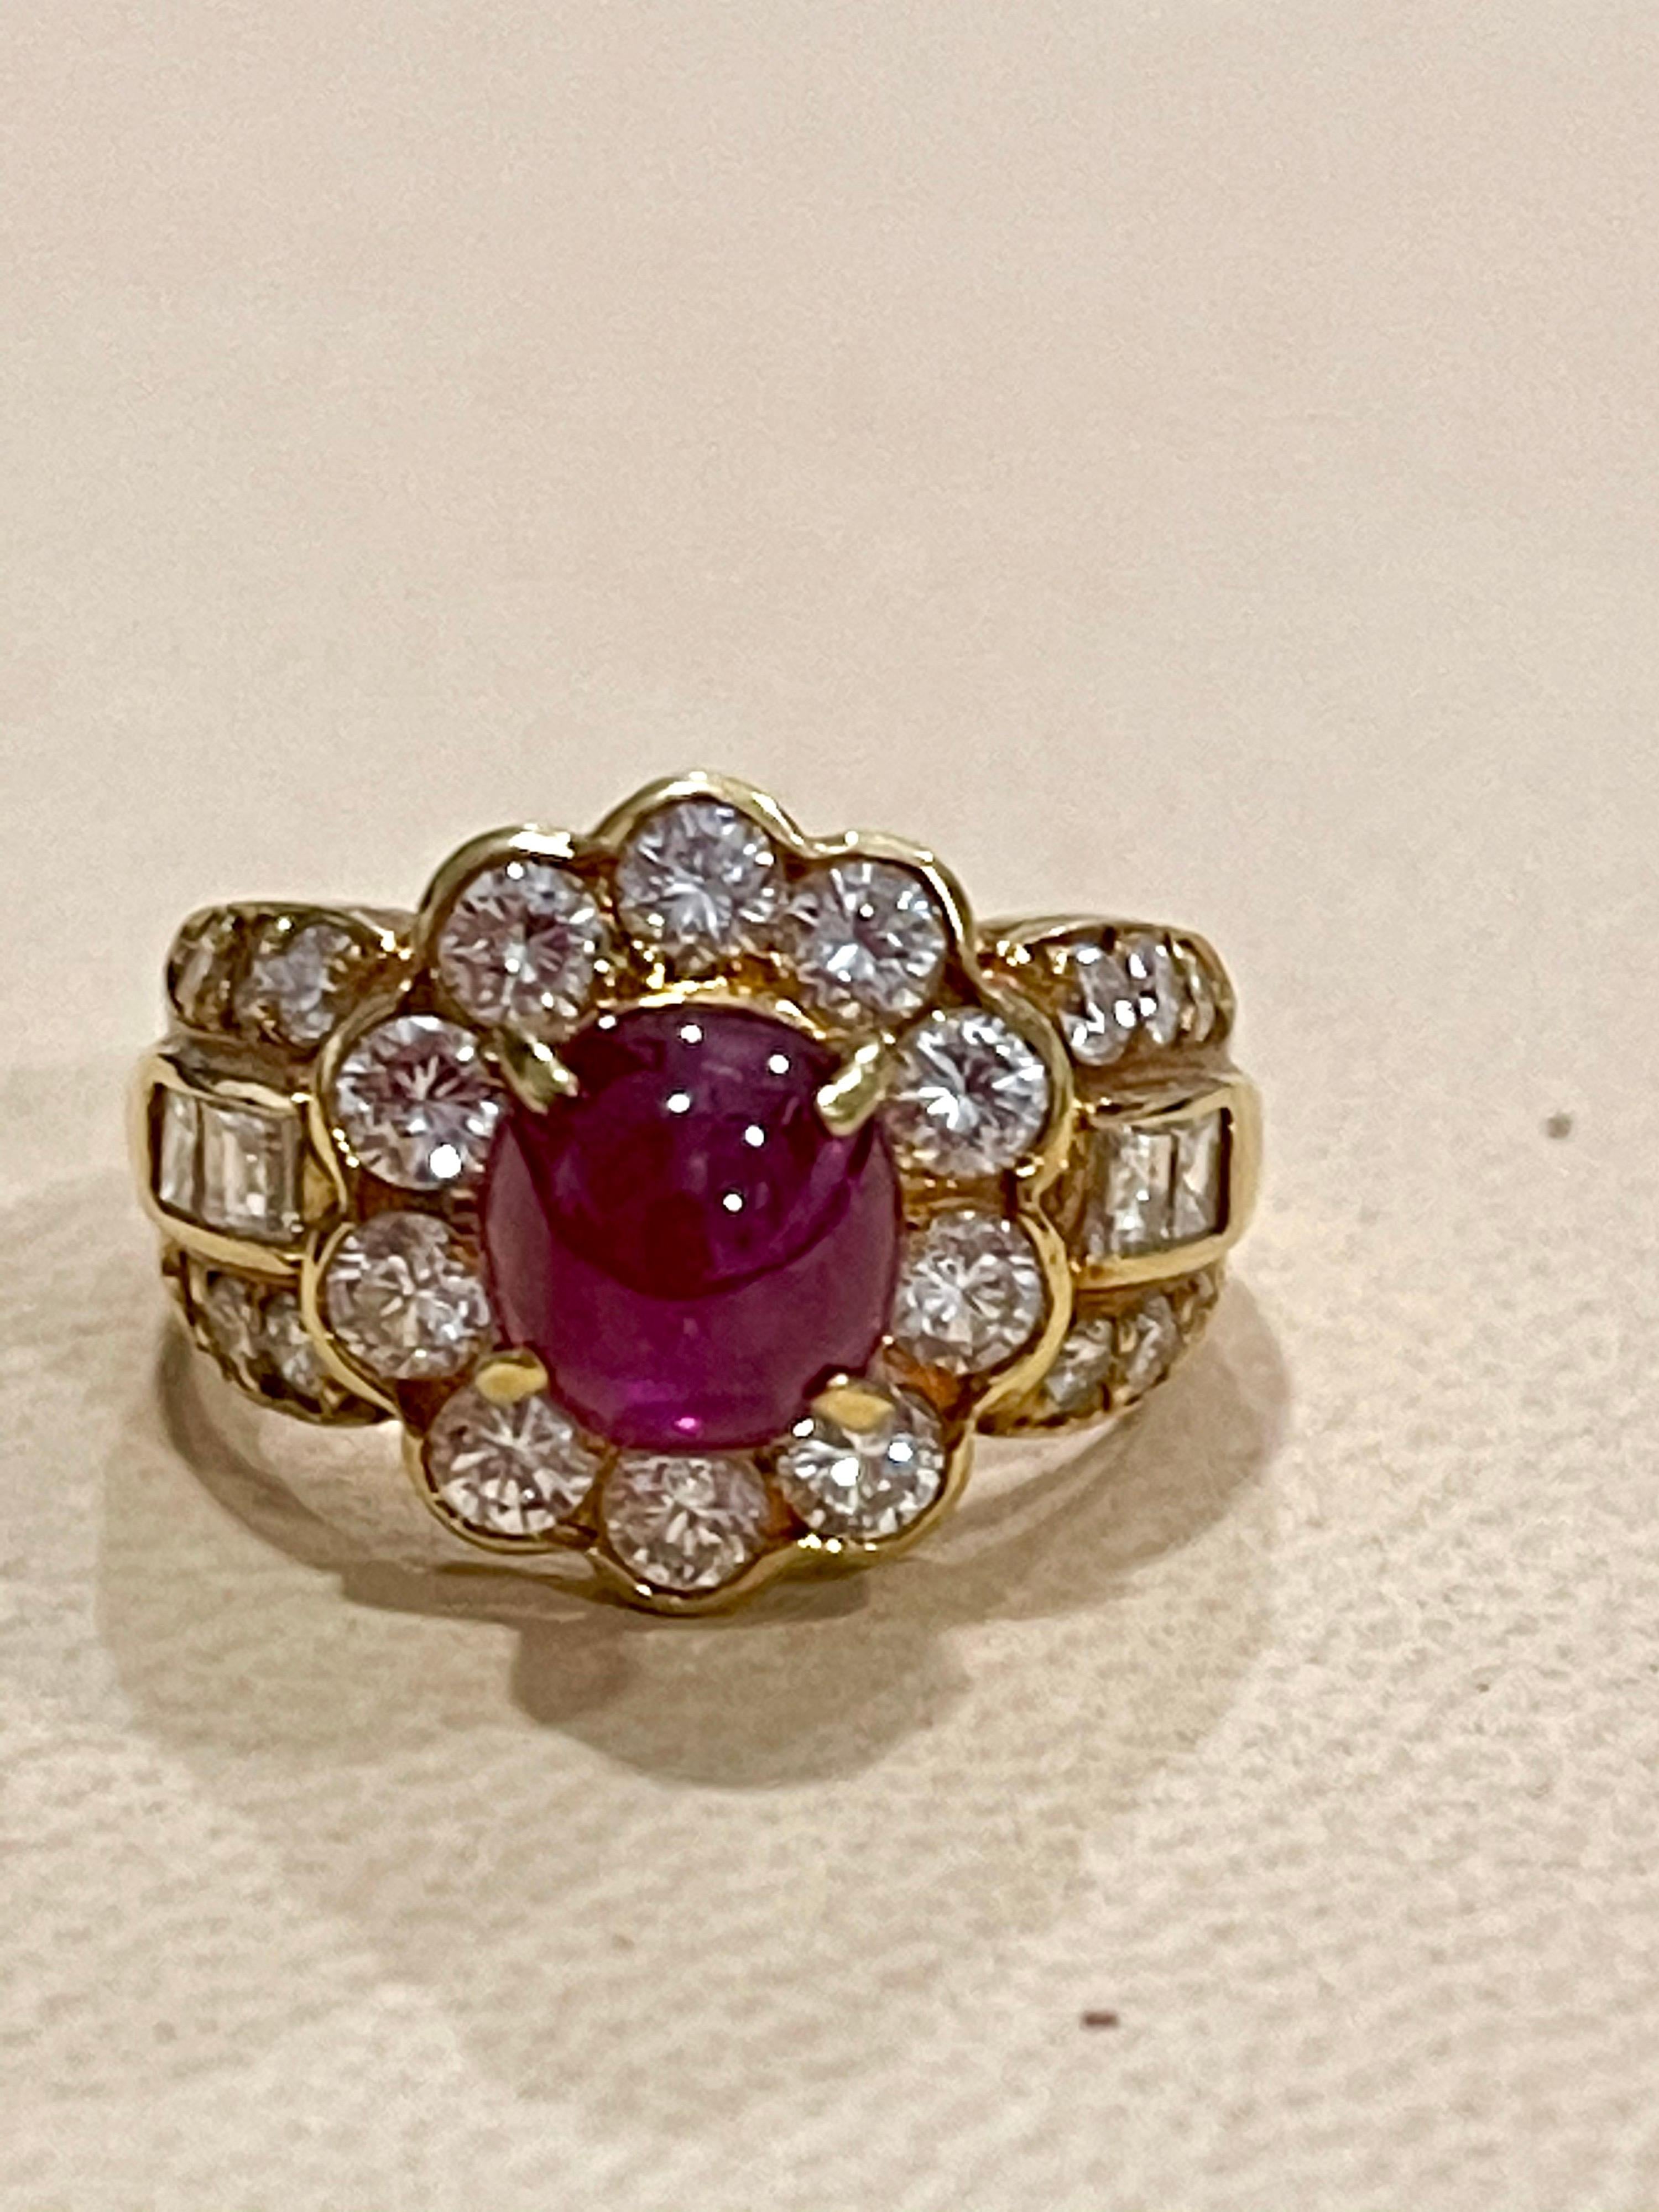 3.50 Ct Natural Burma Cabochon Ruby & 1.8 Ct Diamond 18 Karat Yellow Gold Ring

Three & Half Carat of very clean natural Burma Ruby Cabochon , Beautiful Color and very clean Ruby
There are 1.8 Ct of Baguettes and Round Brilliant cut diamonds Diamond